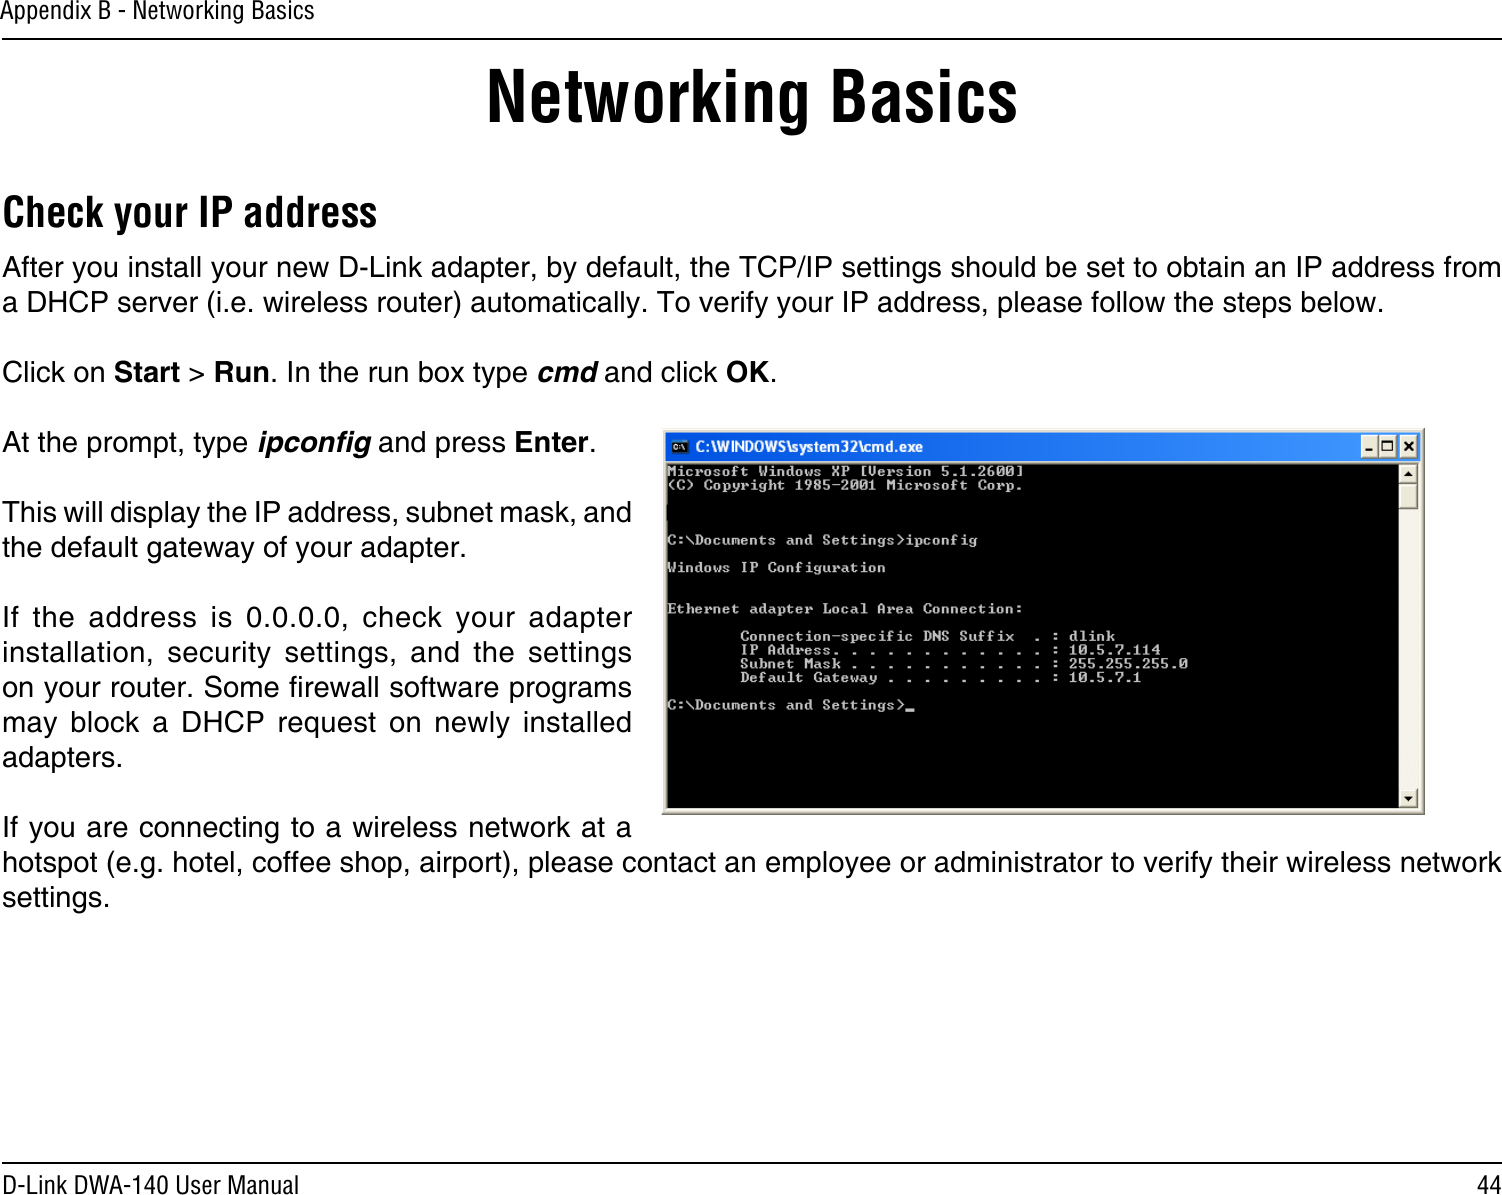 44D-Link DWA-140 User ManualAppendix B - Networking BasicsNetworking BasicsCheck your IP addressAfter you install your new D-Link adapter, by default, the TCP/IP settings should be set to obtain an IP address from a DHCP server (i.e. wireless router) automatically. To verify your IP address, please follow the steps below.Click on Start &gt; Run. In the run box type cmd and click OK.At the prompt, type ipconﬁg and press Enter.This will display the IP address, subnet mask, and the default gateway of your adapter.If  the  address  is  0.0.0.0,  check  your  adapter installation,  security  settings,  and  the  settings on your router. Some rewall software programs may  block  a  DHCP  request  on  newly  installed adapters. If you are connecting to a wireless network at a hotspot (e.g. hotel, coffee shop, airport), please contact an employee or administrator to verify their wireless network settings.